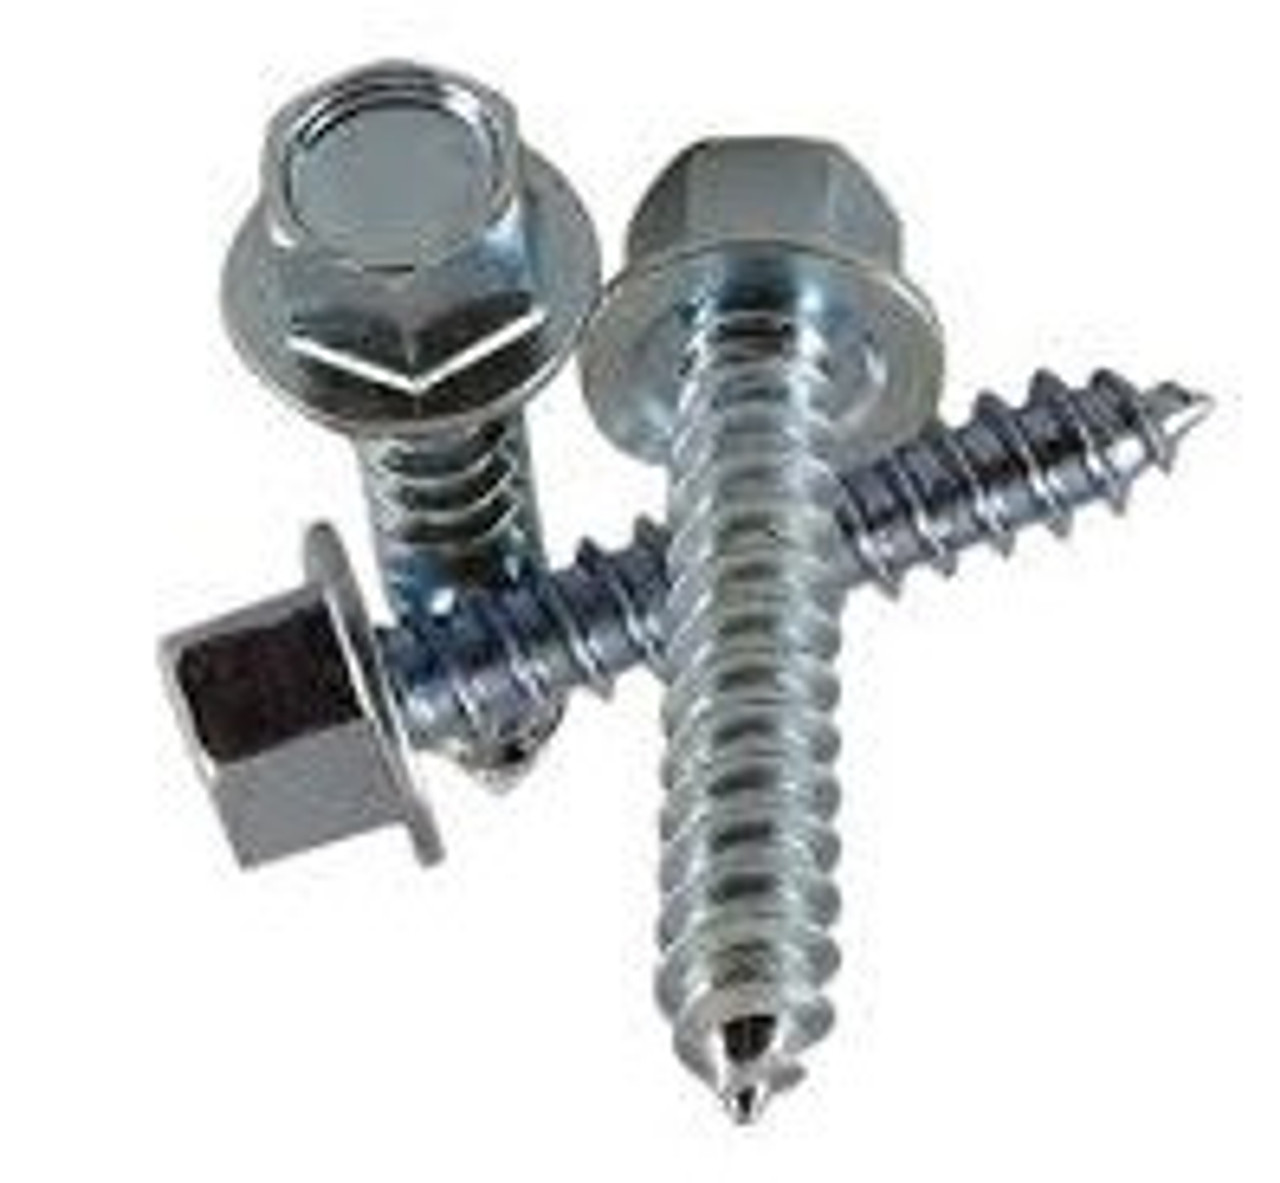 5/16 x 2-1/2 High Hex Washer Head Lag Screw The Nutty Company,